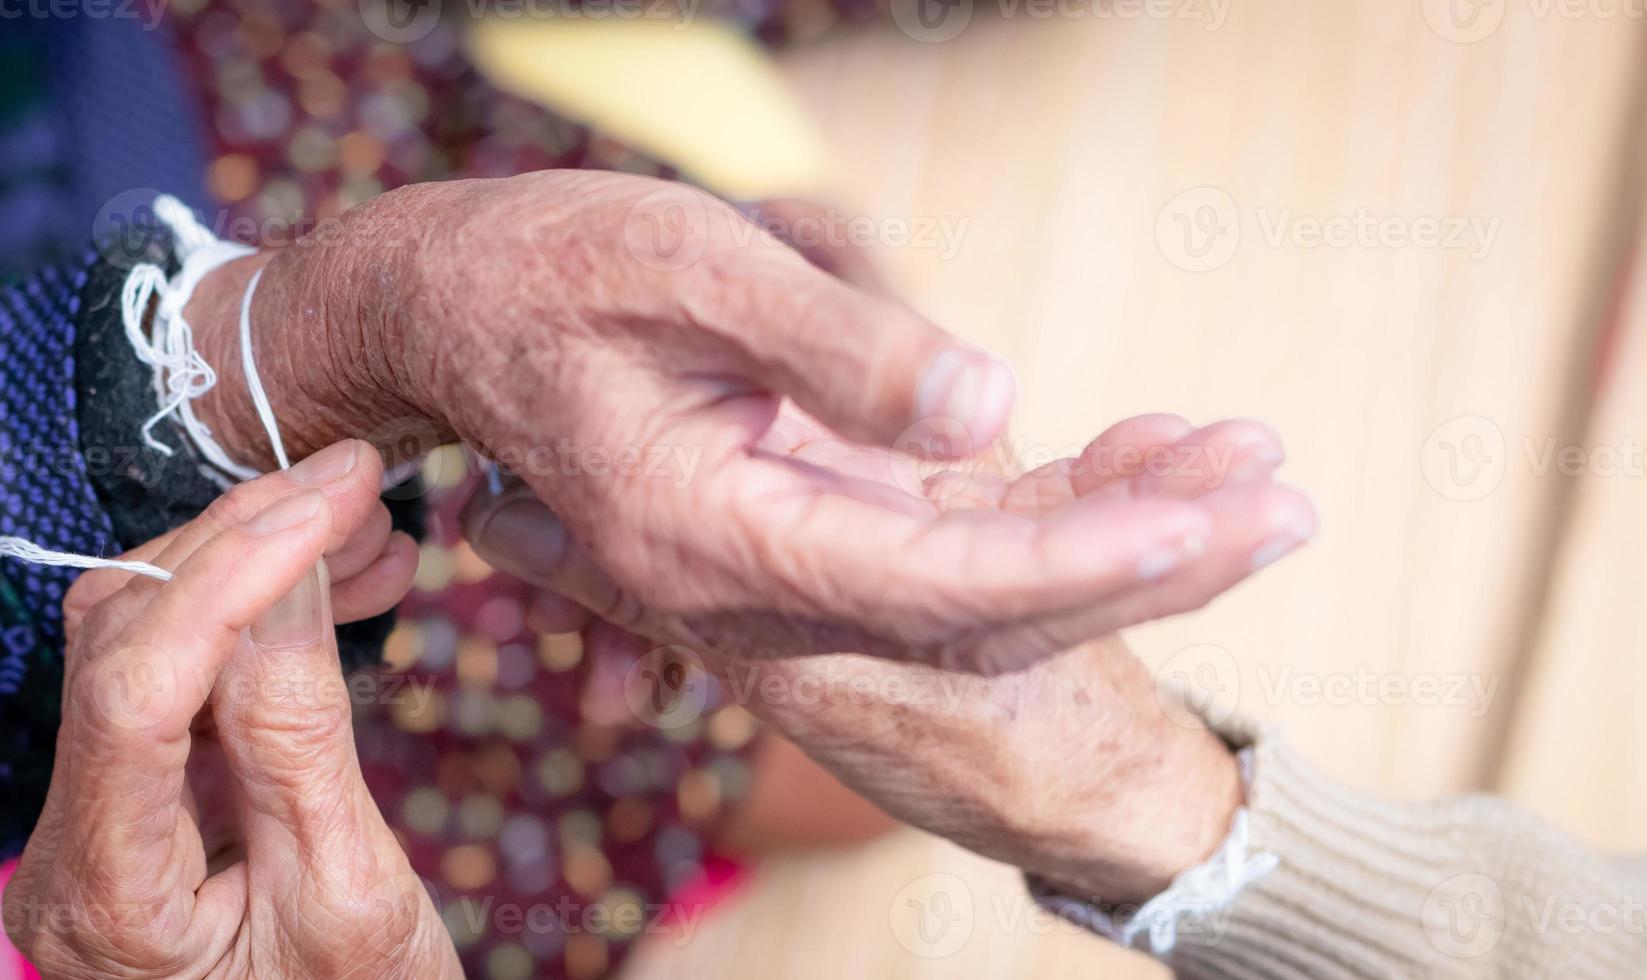 The ceremony of binding elderly people wrist with the holy thread to console old people's Kwan. Thai culture. Beliefs and local culture of Northeastern Thai people. Aging society in Southeast Asia. photo